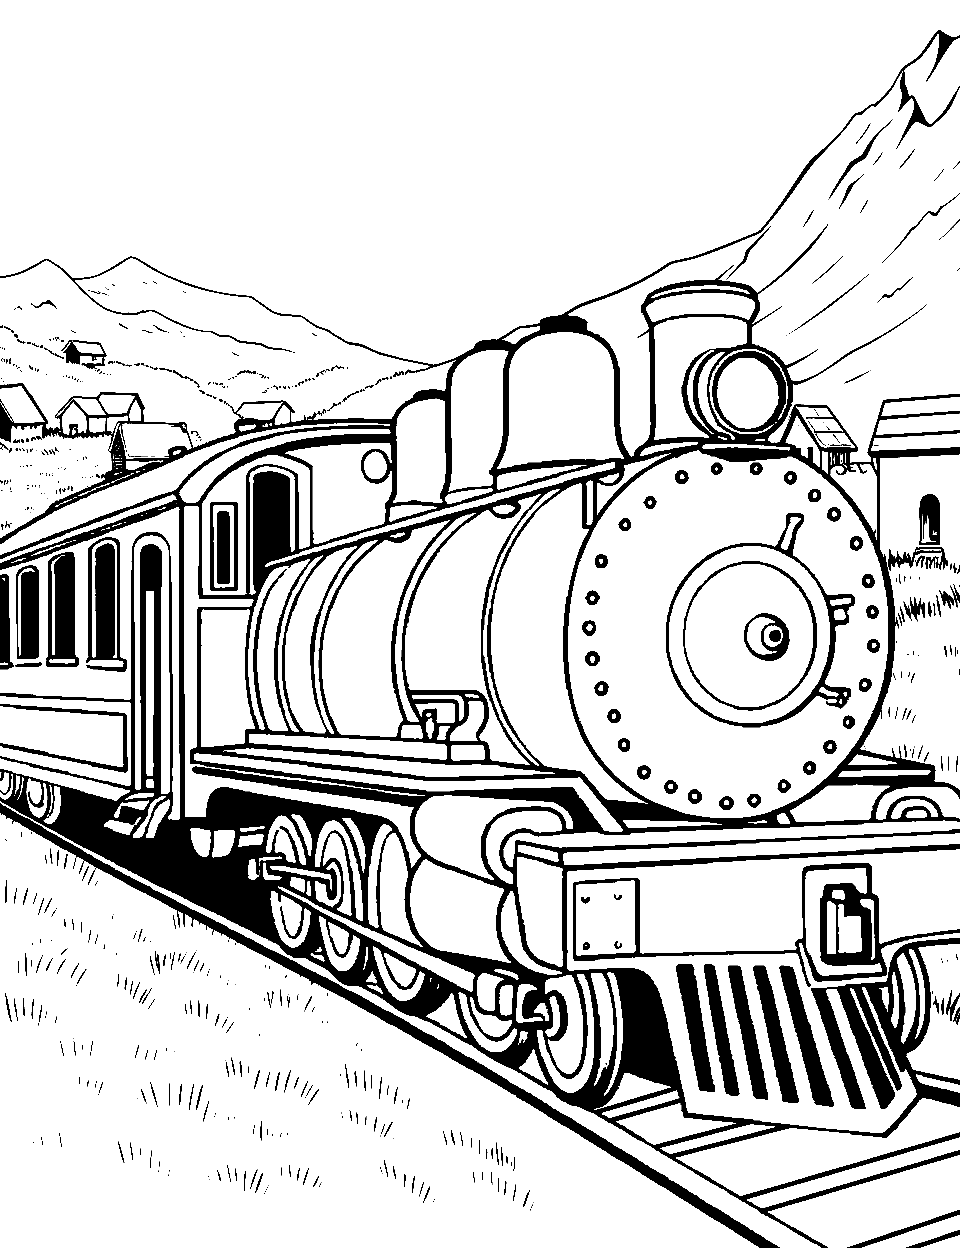 European Countryside Journey Coloring Page - An old-fashioned European train in a scenic countryside.